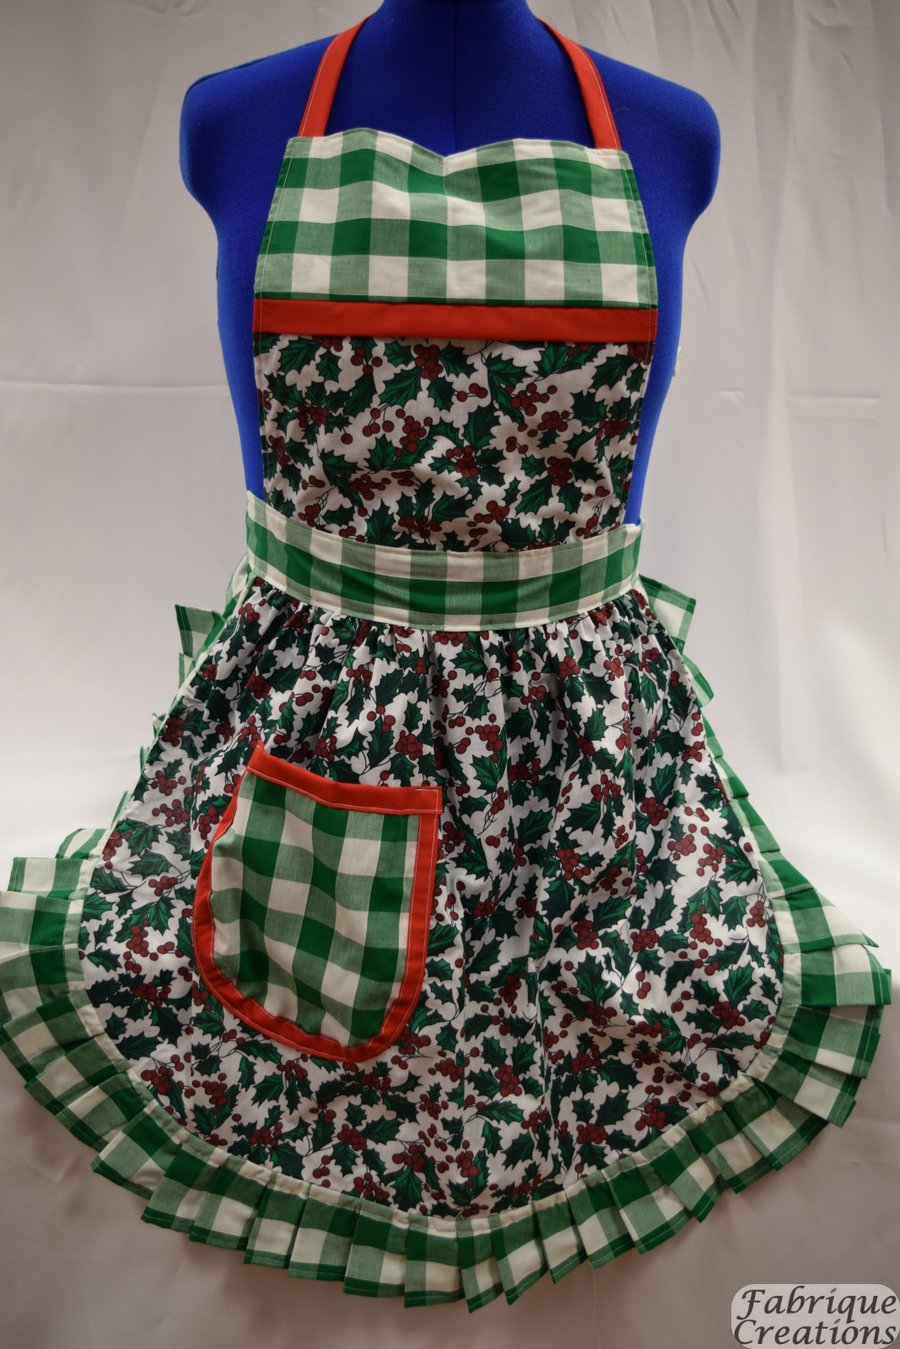 Vintage 50s Style Full Apron Pinny - Christmas Holly on White with Green Trim